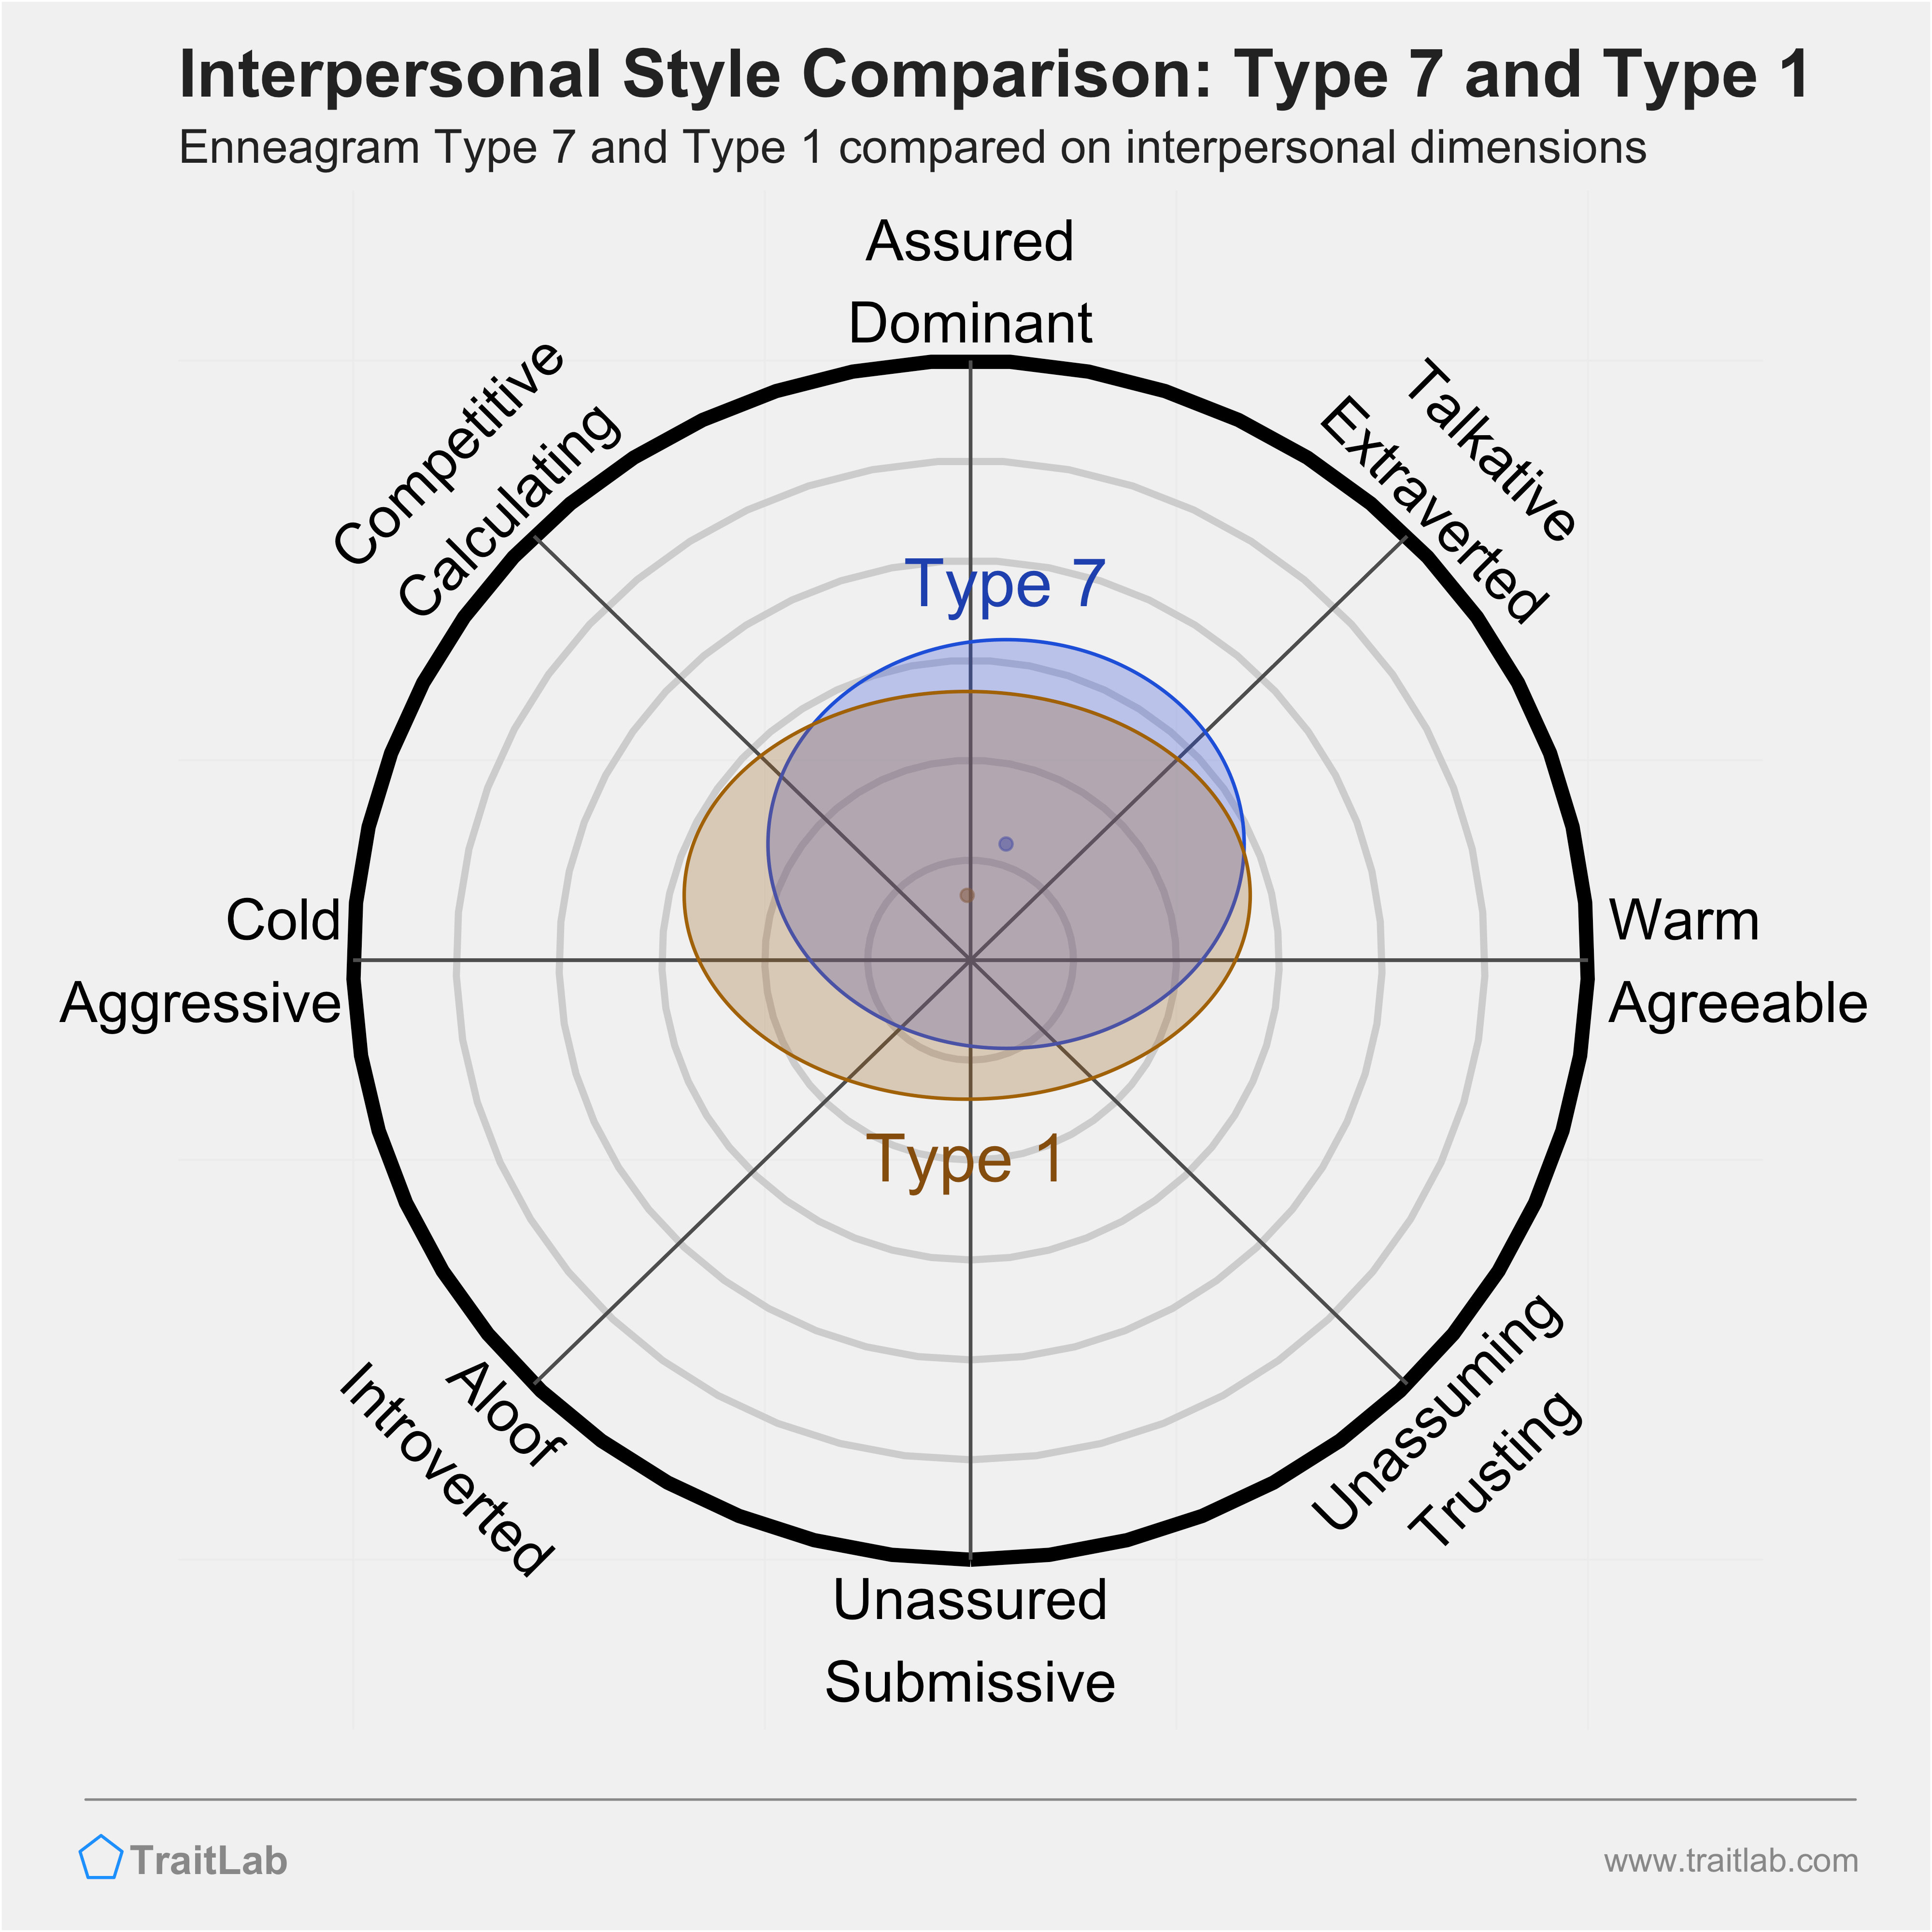 Enneagram Type 7 and Type 1 comparison across interpersonal dimensions